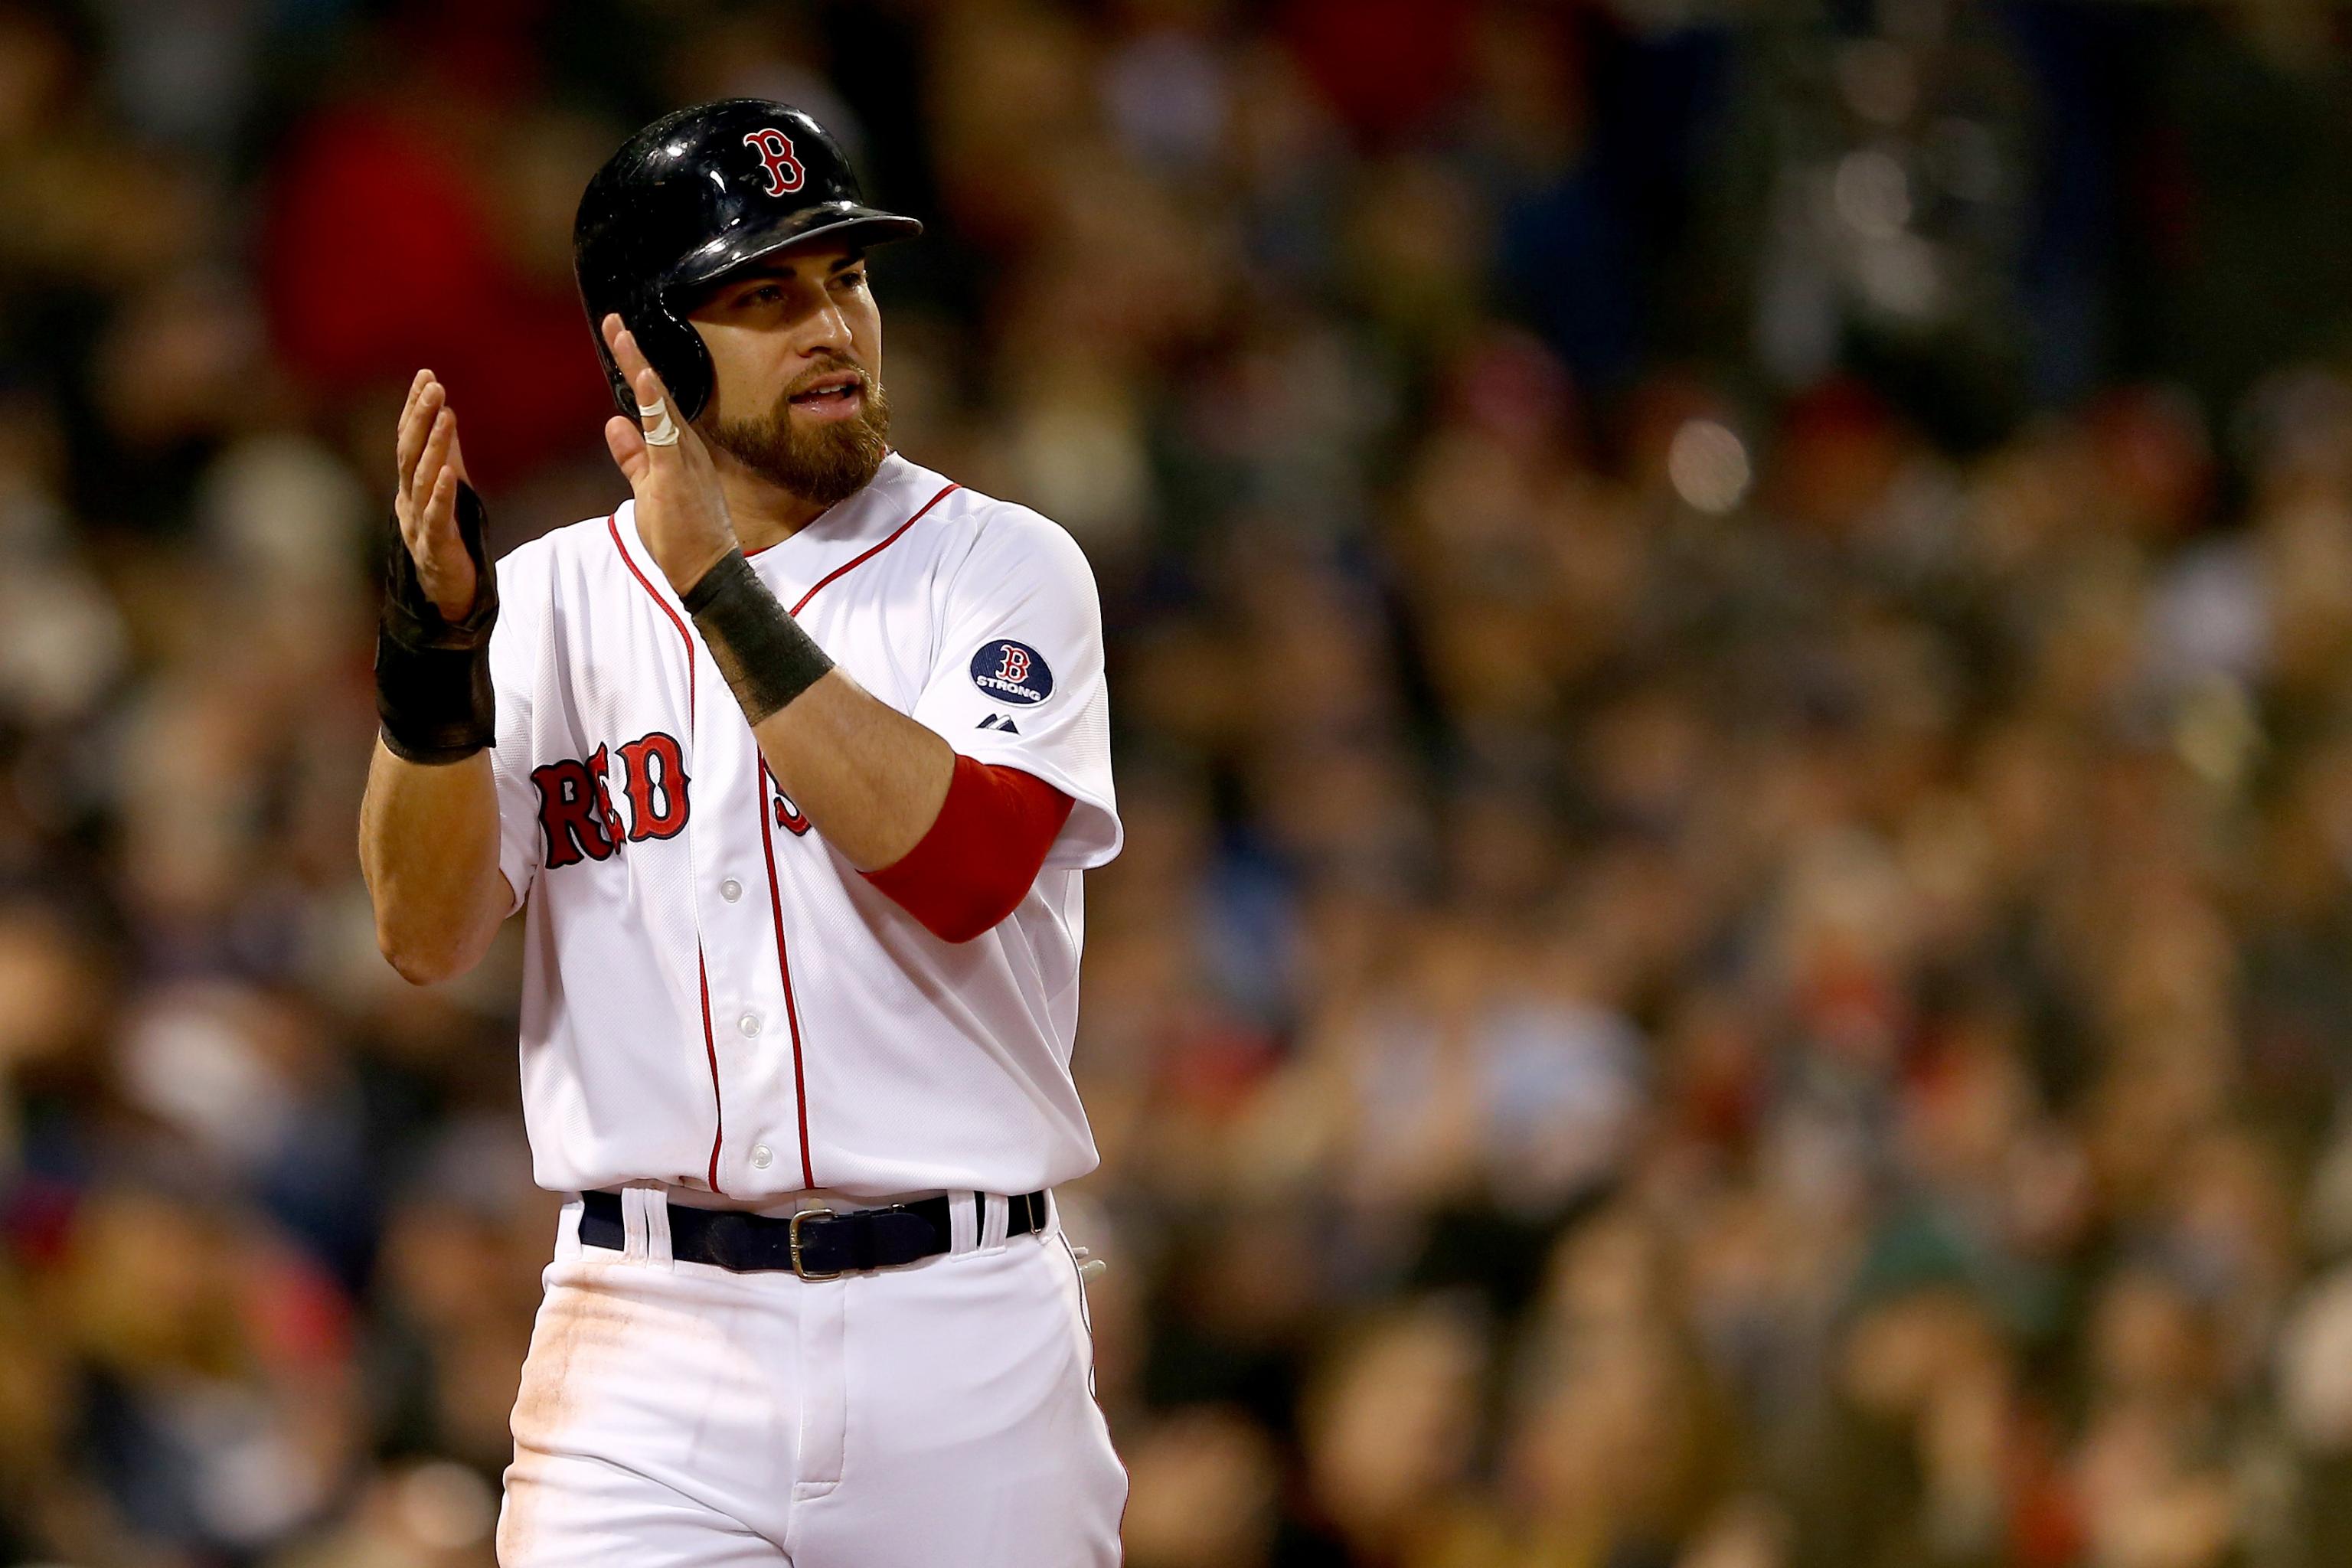 Red Sox sign Mike Napoli to 3-year, $39 million deal